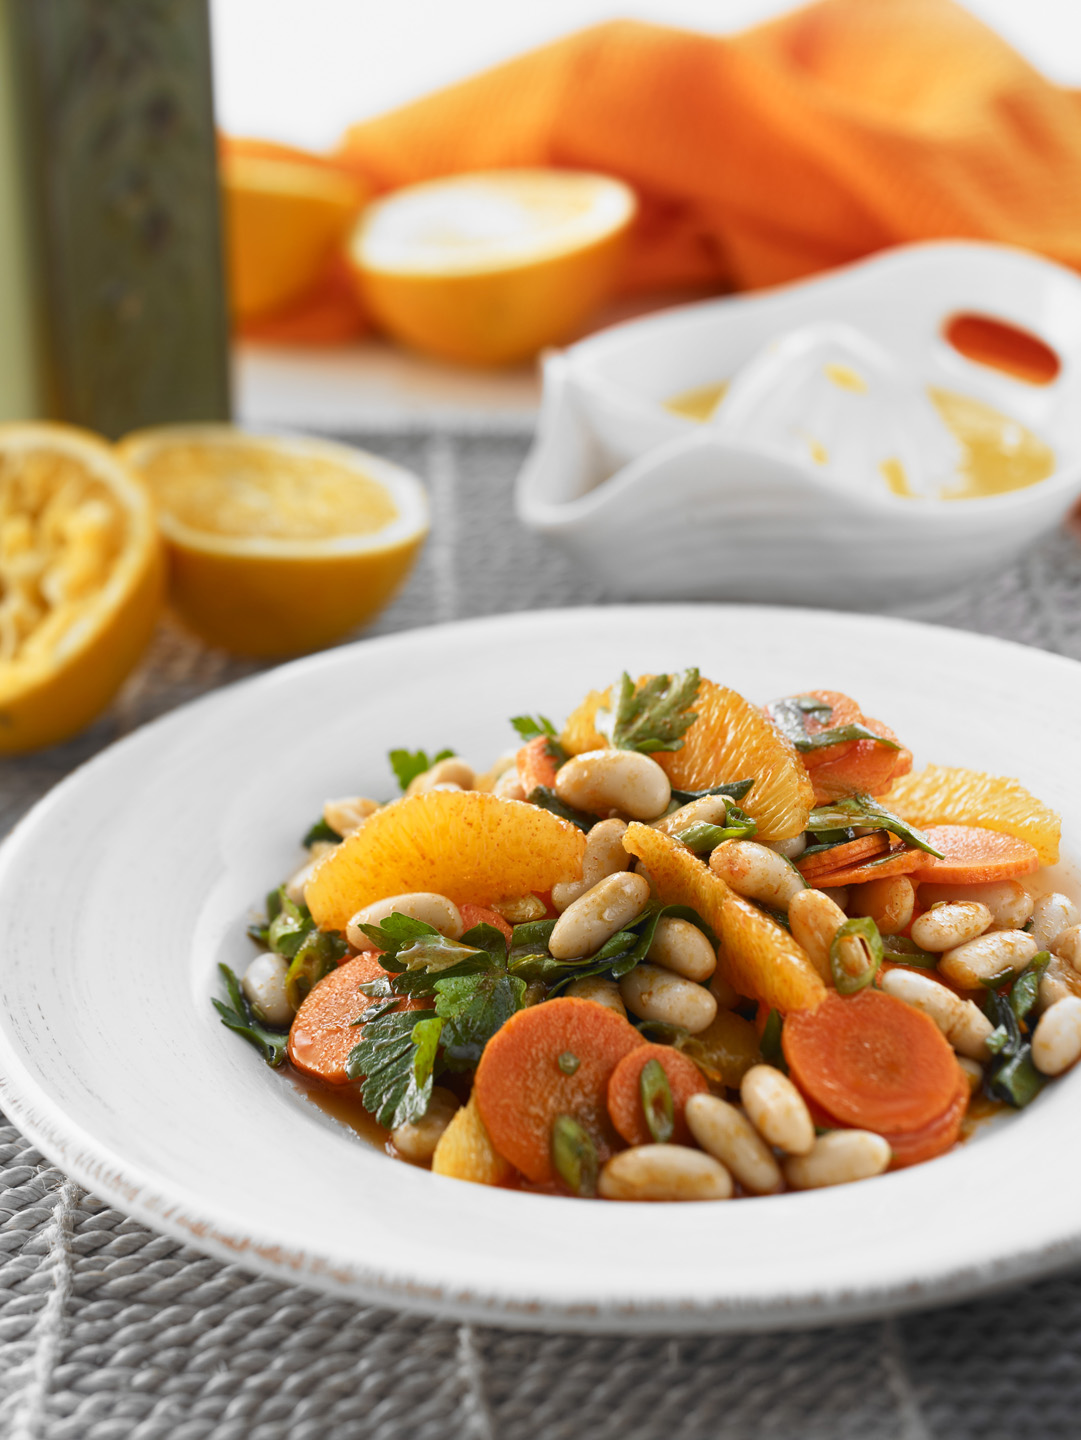 Carrot, Orange and Cannellini Bean Salad